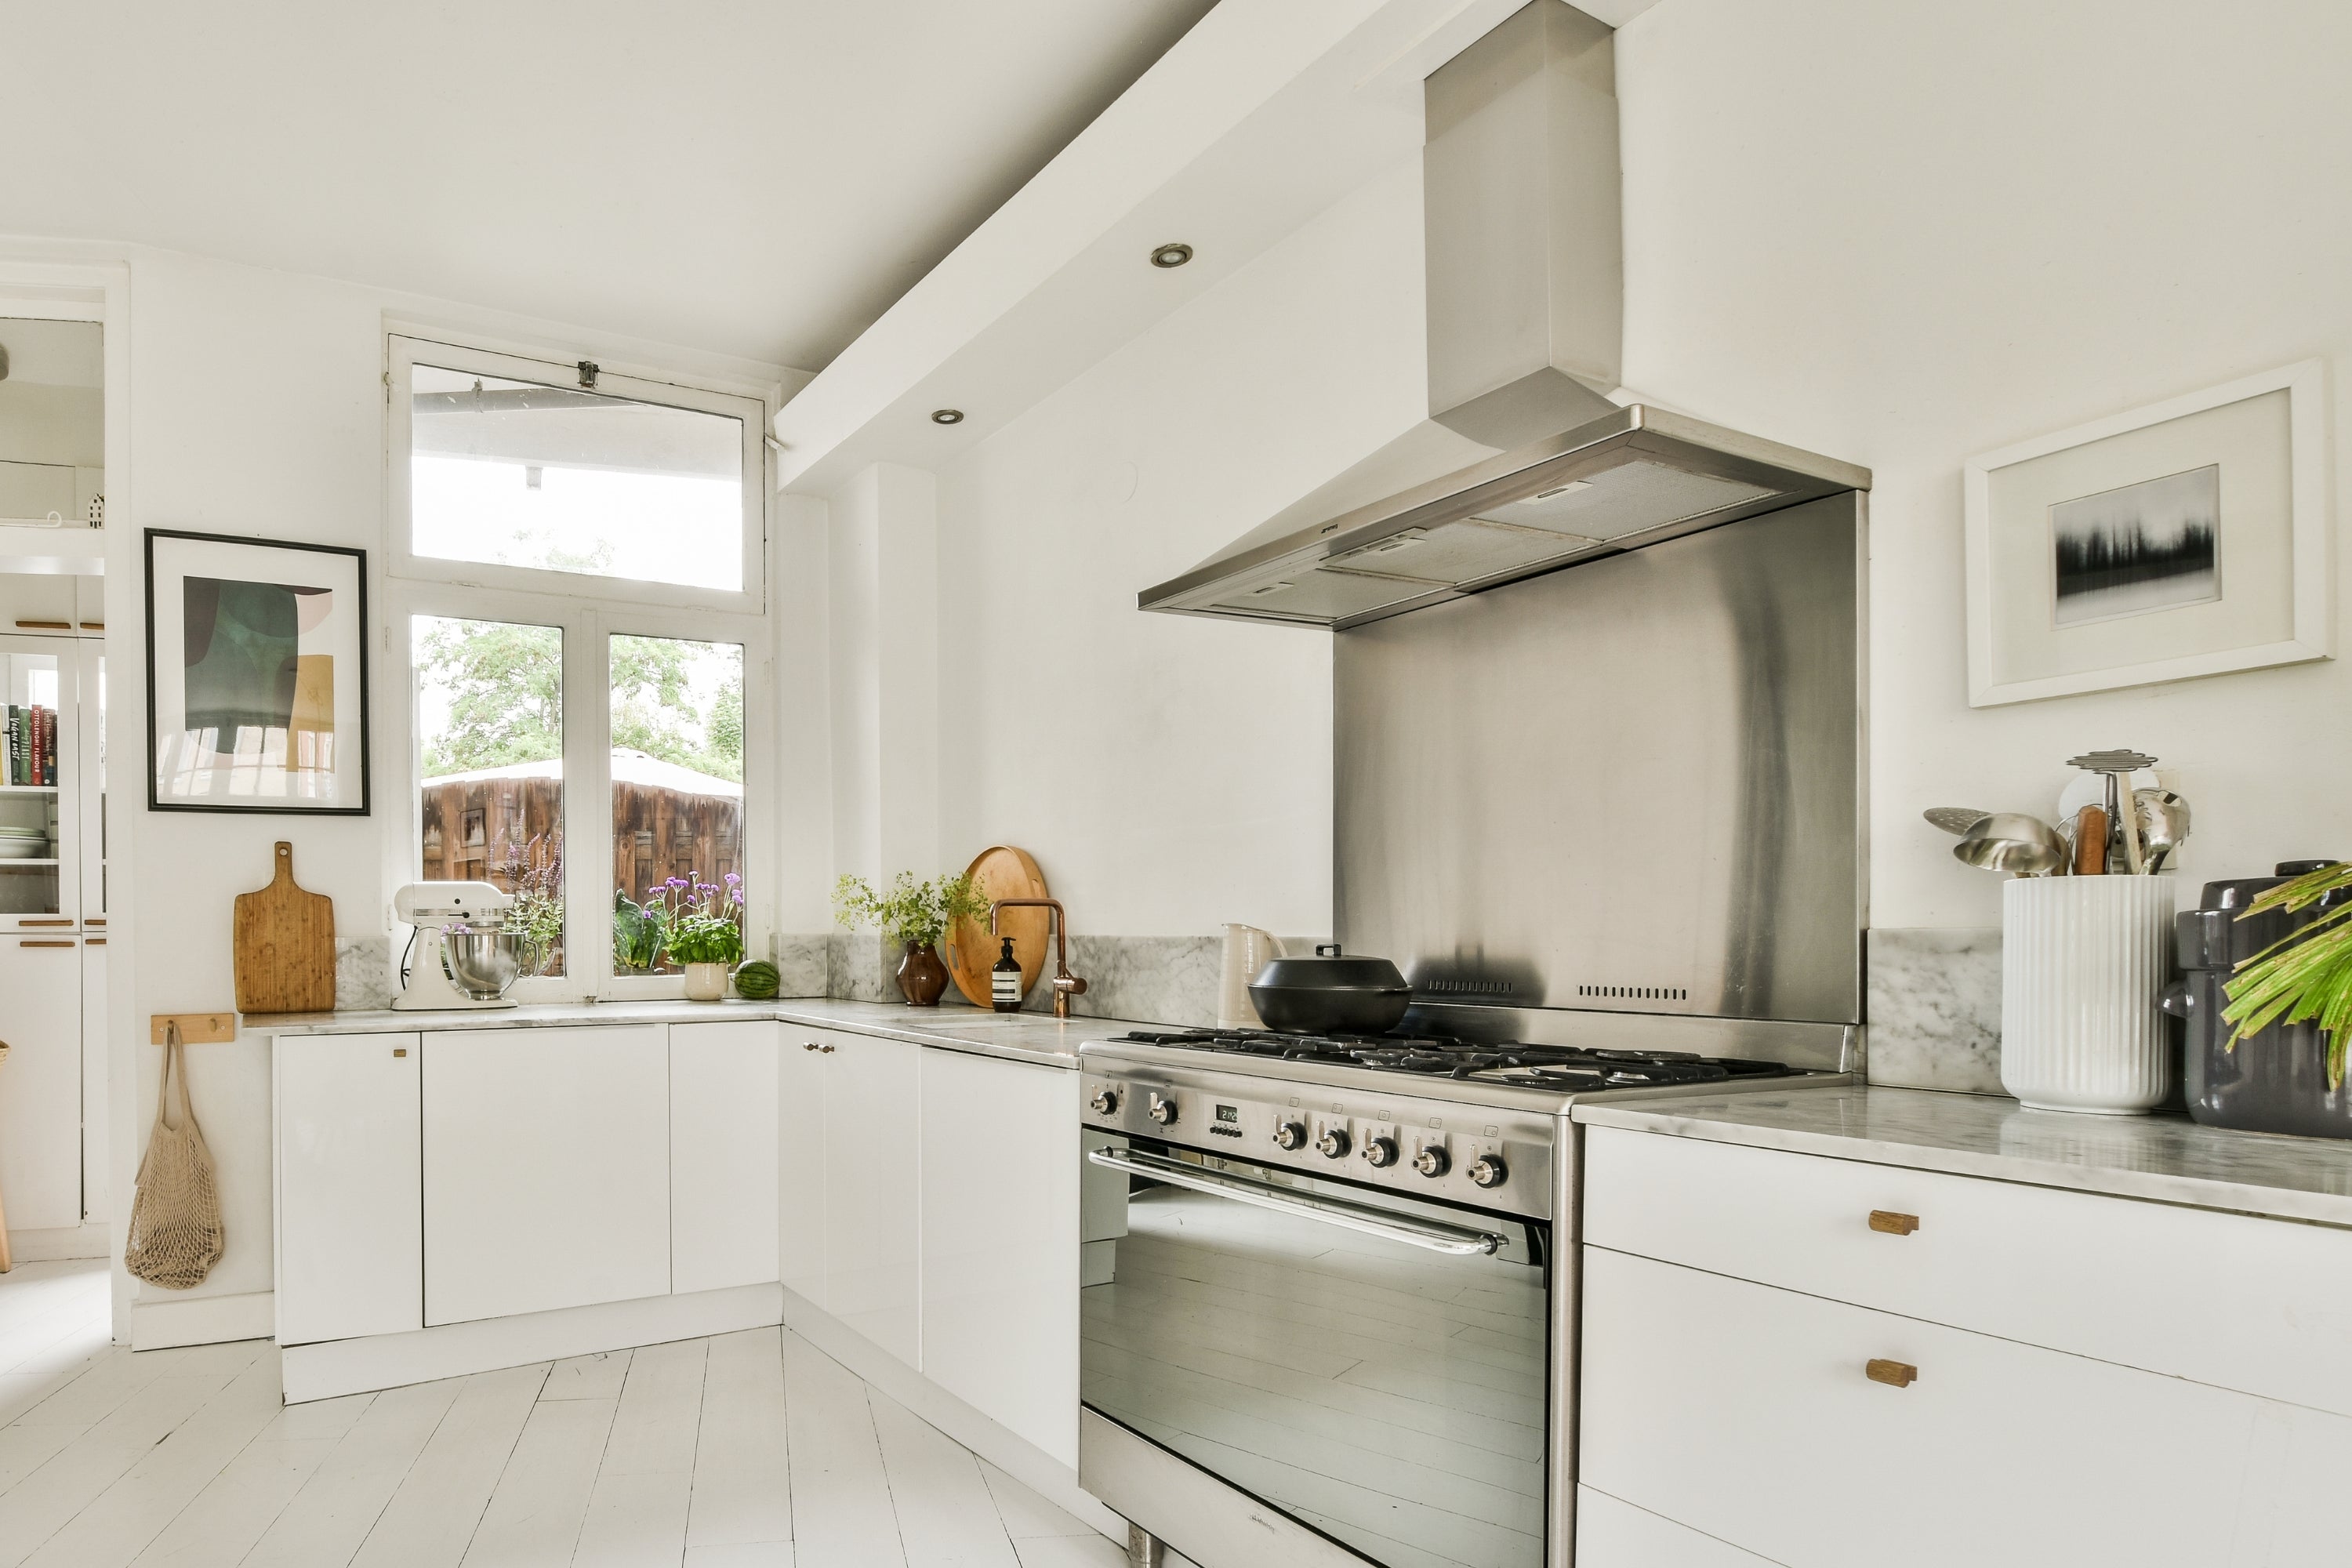 5 Ways to Clean Stainless Steel with Ingredients You Already Have at Home image showing stainless steel range hood, backsplash, and oven